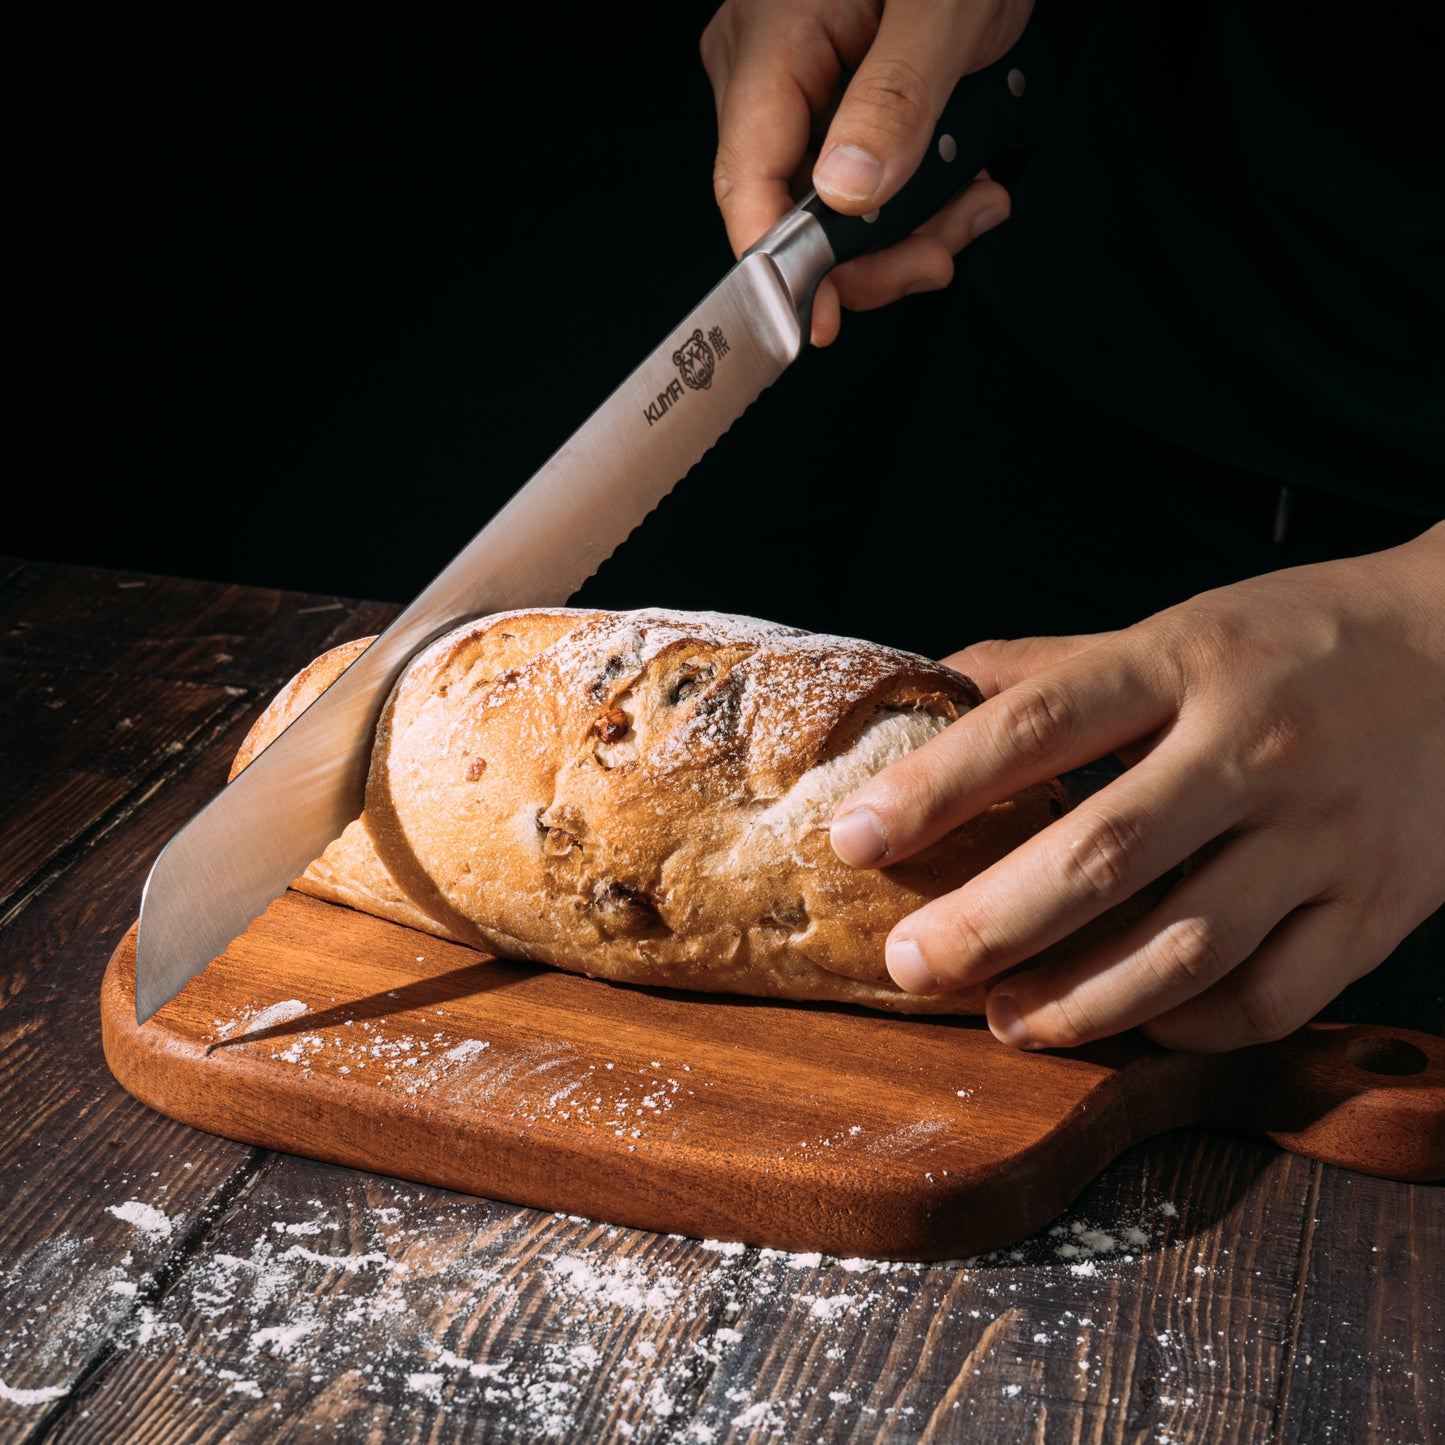 KUMA Fine Serrated Bread Knife Classic - 10" Flexible Blade For Real Slicing - Cut Without Ruining Loaf